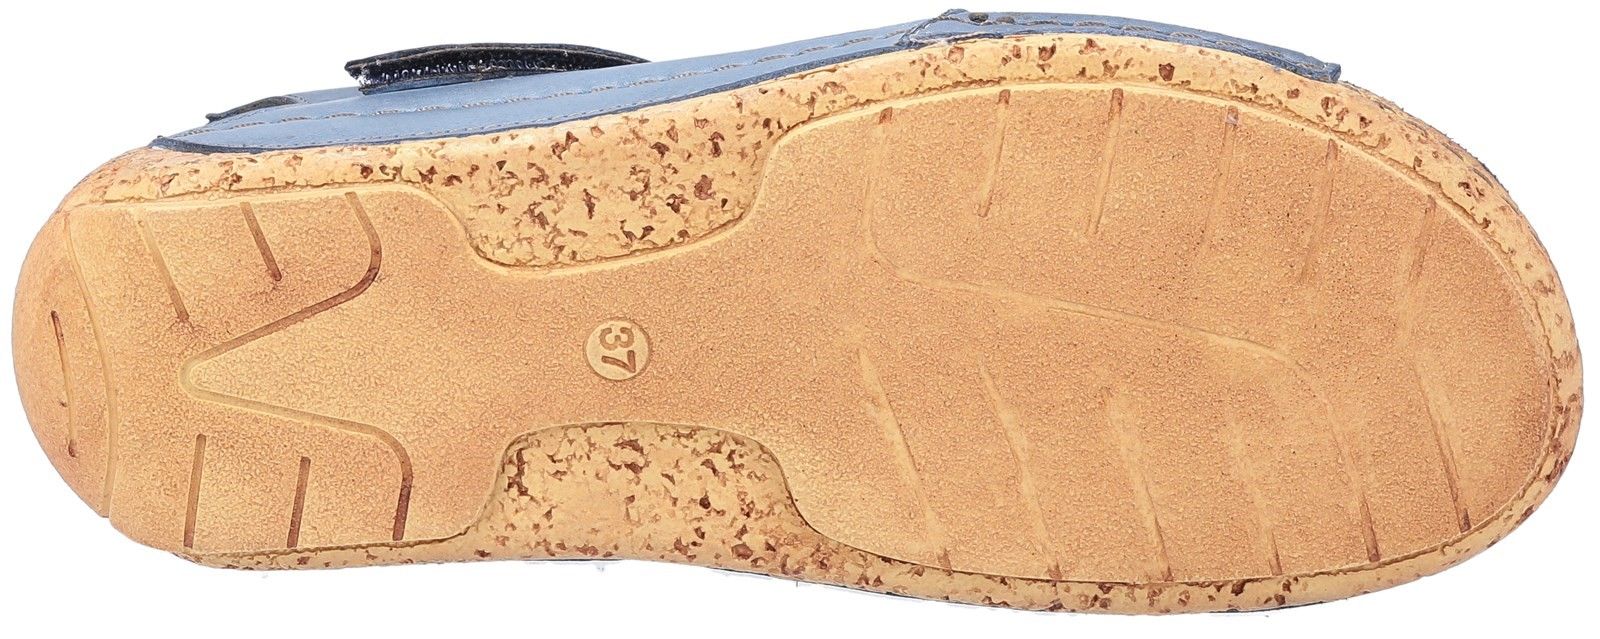 Open toe smooth leather sandal with touch fastening, man made cork wedge sole and beautiful embossed detailing Supple leather upper with embossed and perforated design. 
Touch fastening side fitting. 
Comfortable open toe and back style. 
Comfort padded anatomically shaped leather foot bed. 
30mm low wedge heel.